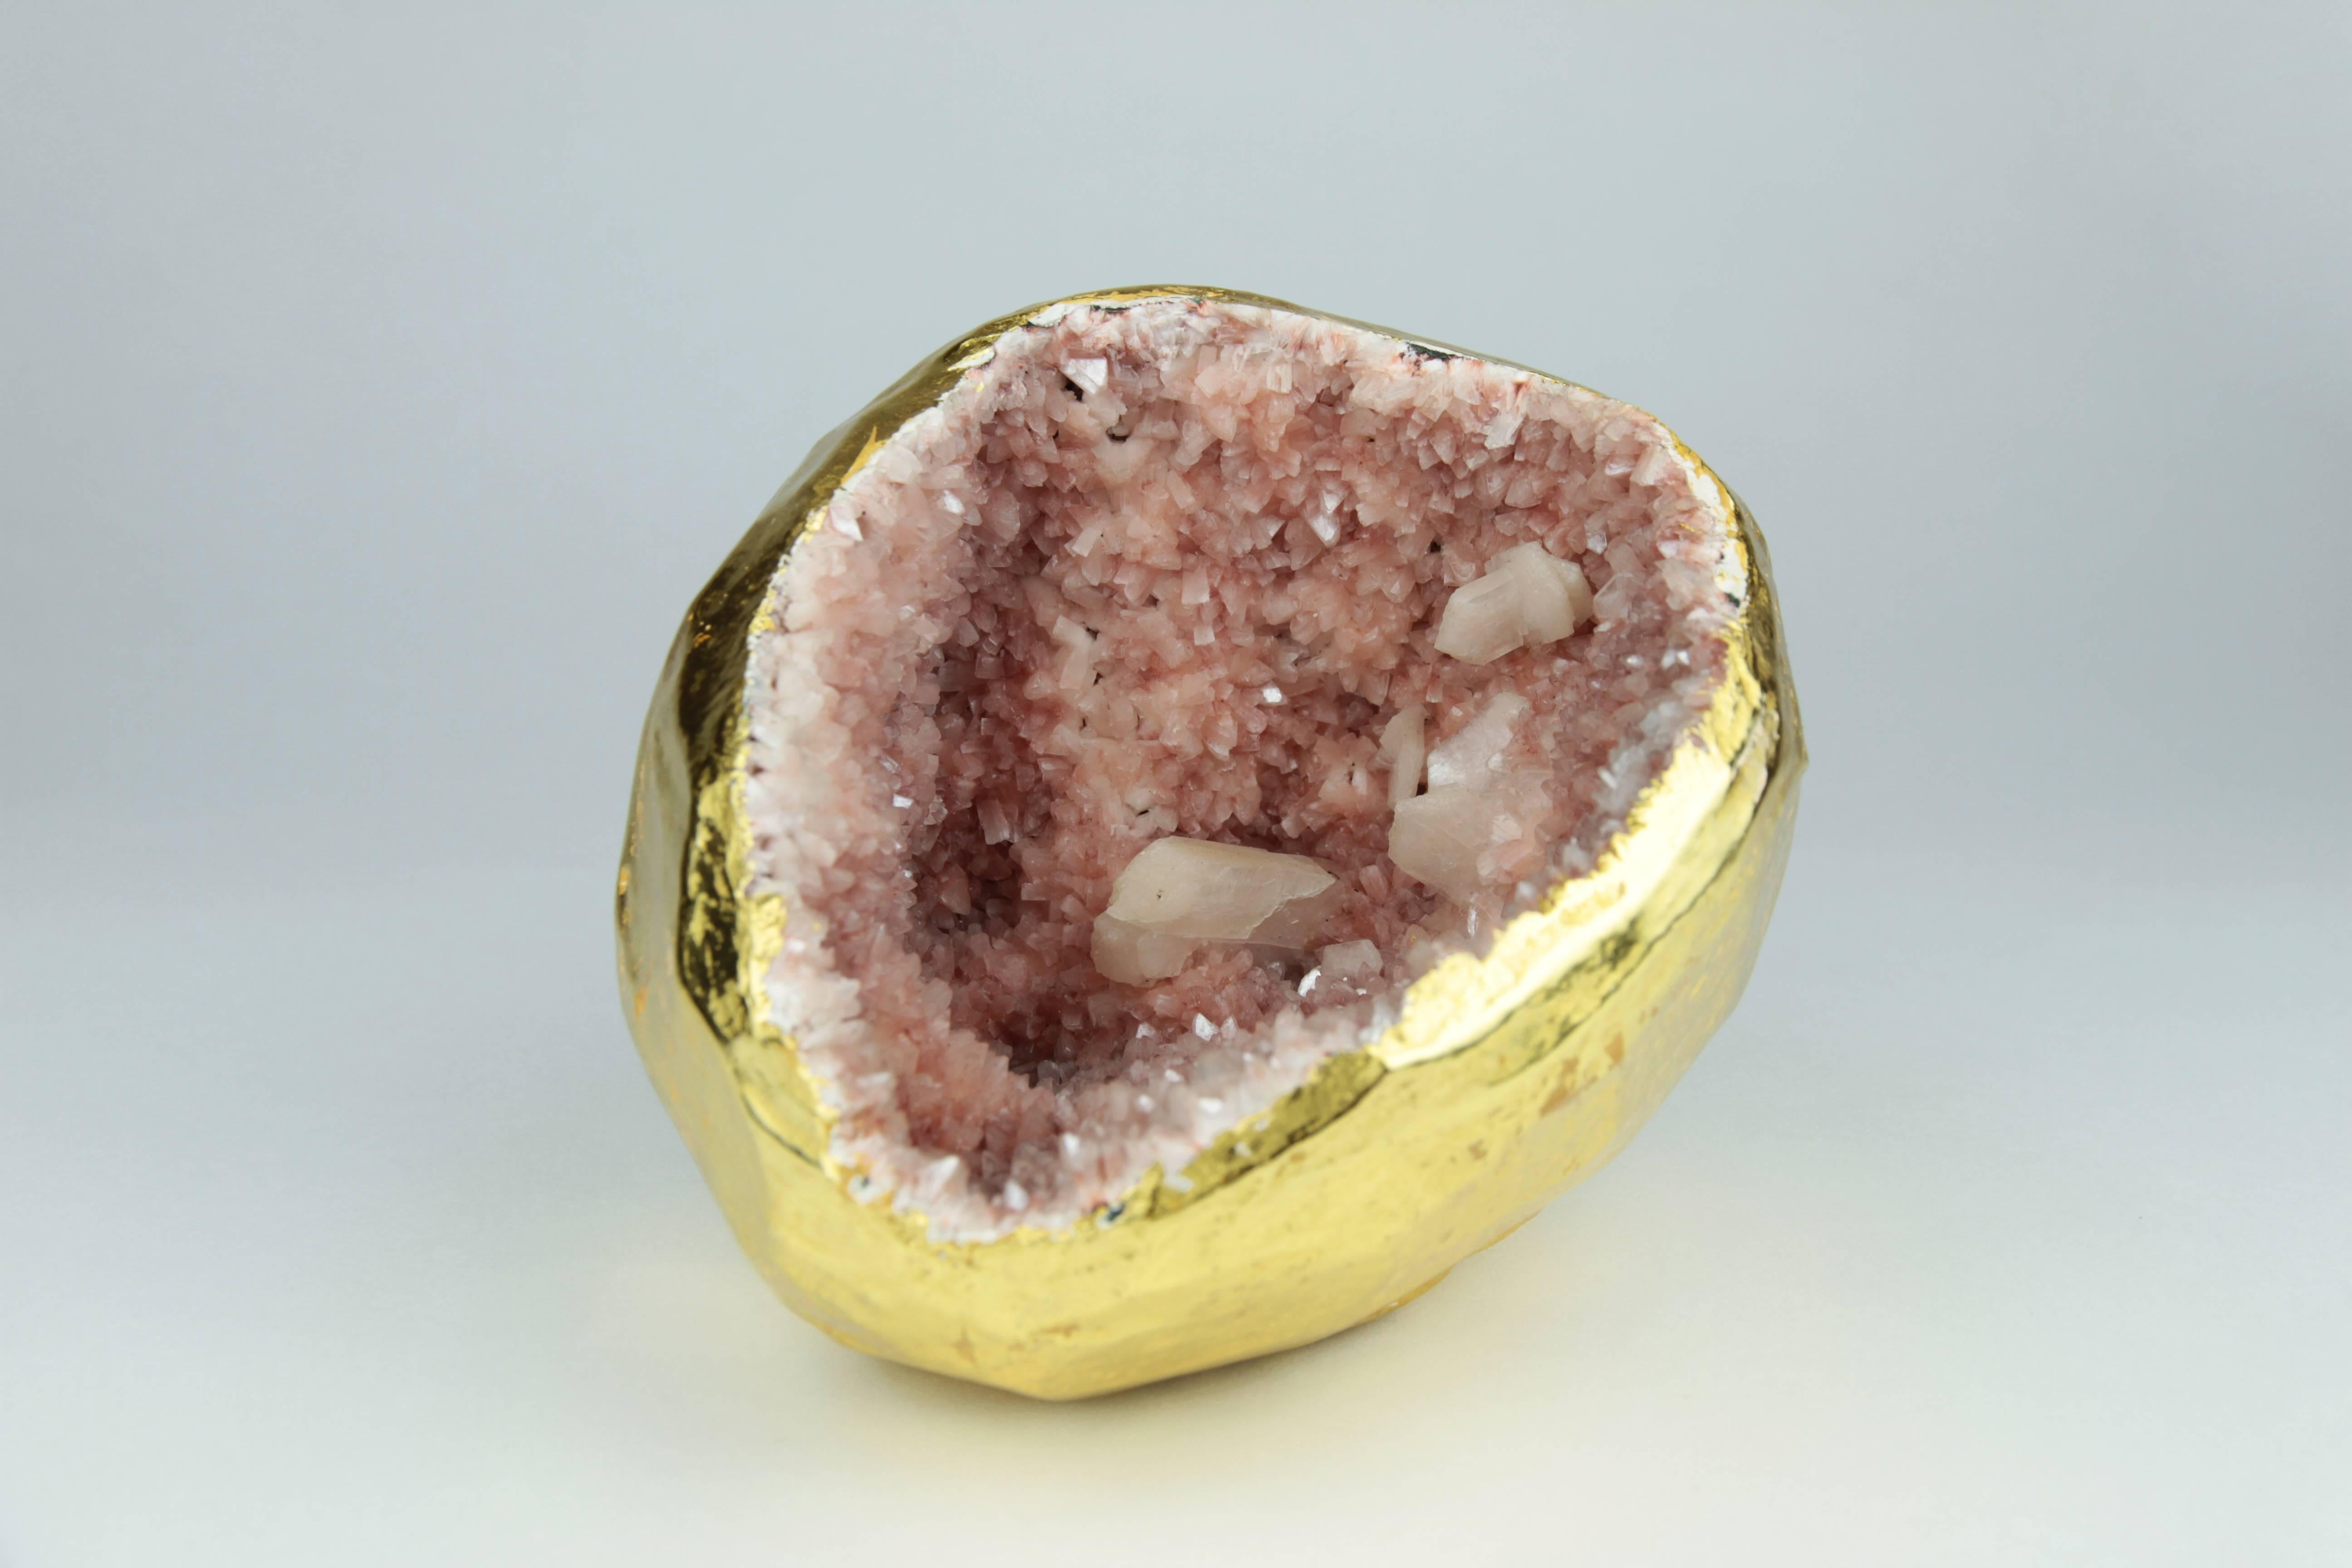 This is an exotic pink crystal geode found in India. It has been meticulously gilded in 22-karat gold. This natural sculpture will look amazing on a desk, coffee table, or anywhere it can be viewed from all sides. This geode is truly one-of-a-kind.